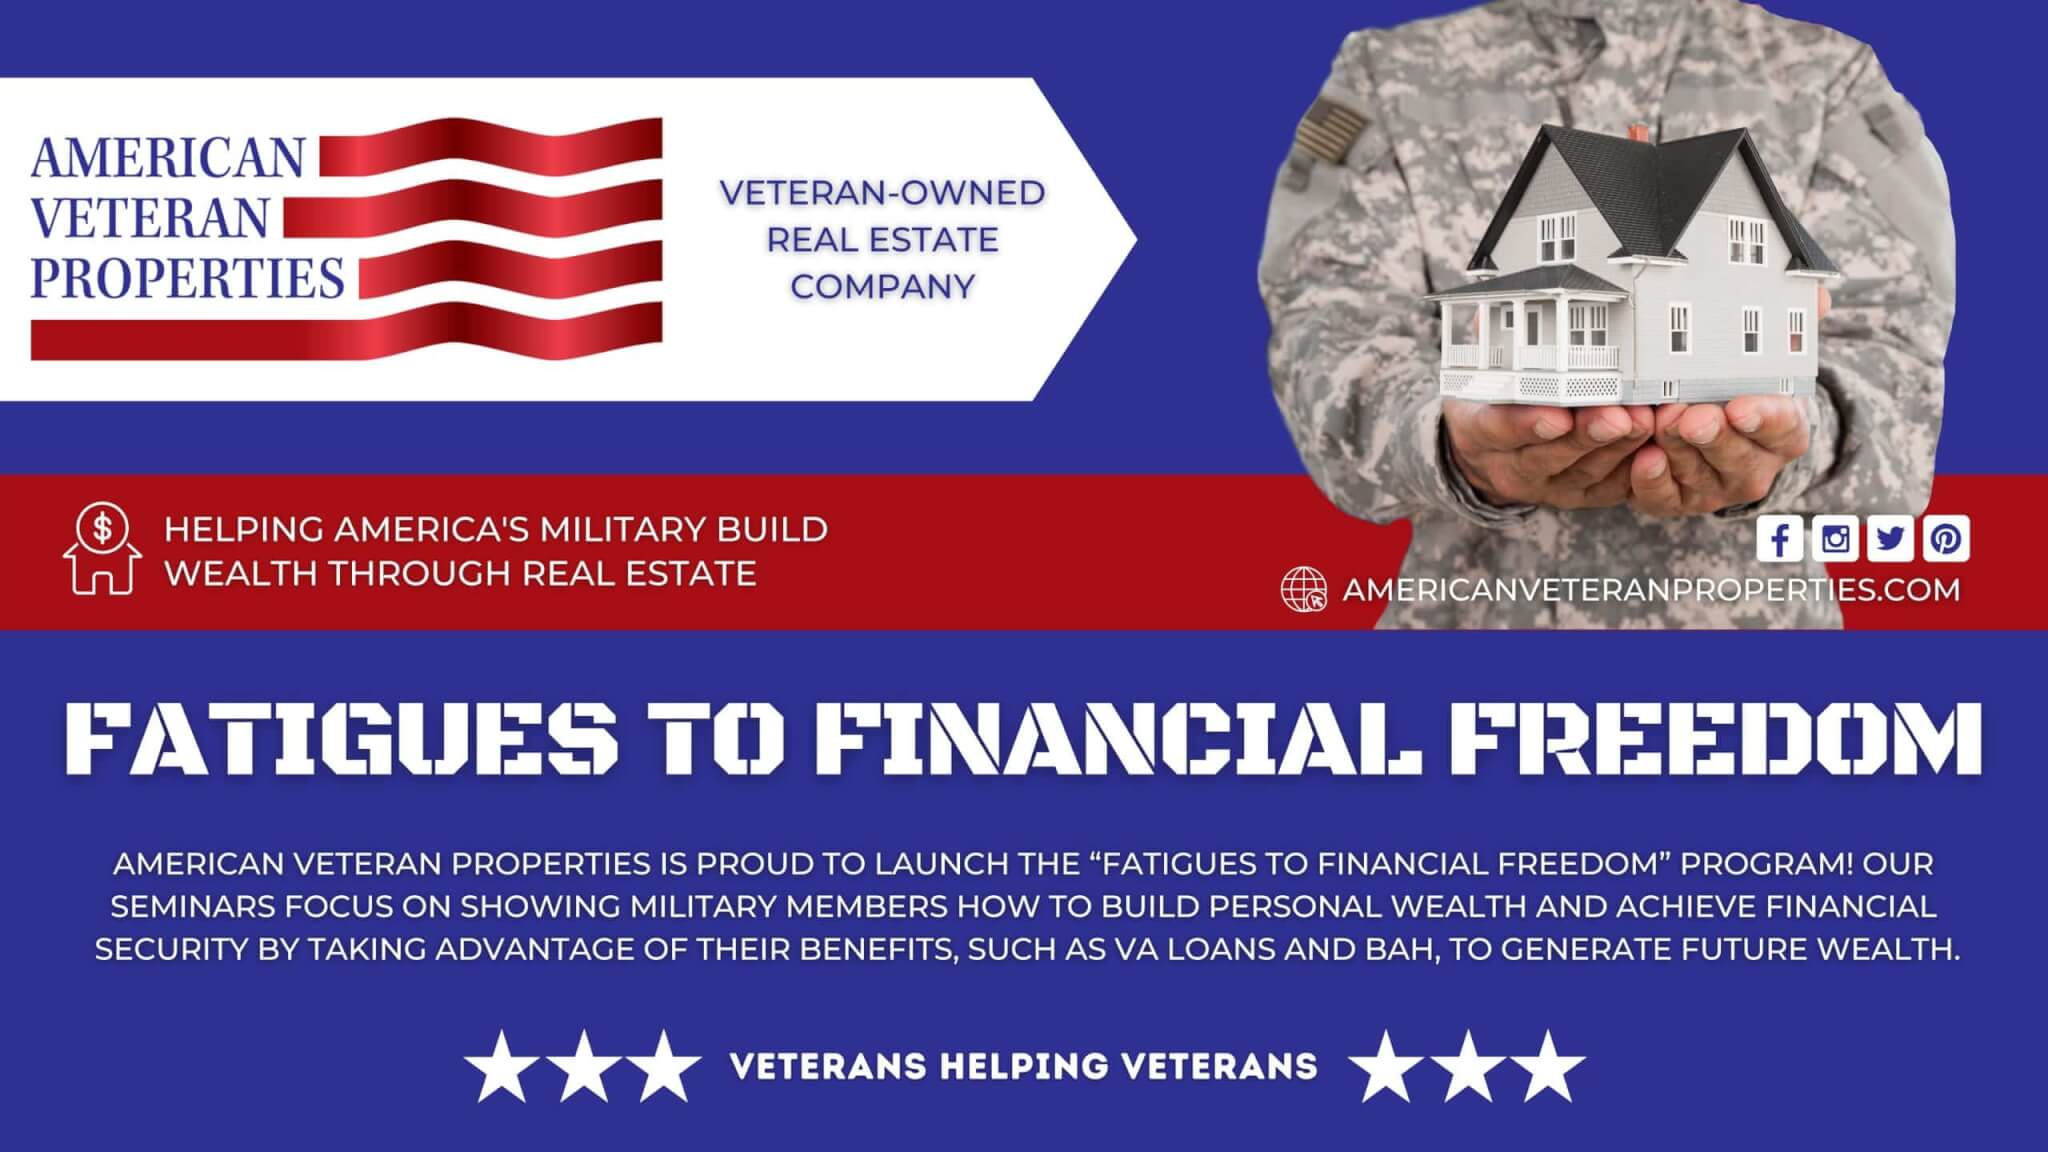 AVP Fatigues to Financial Freedom graphic